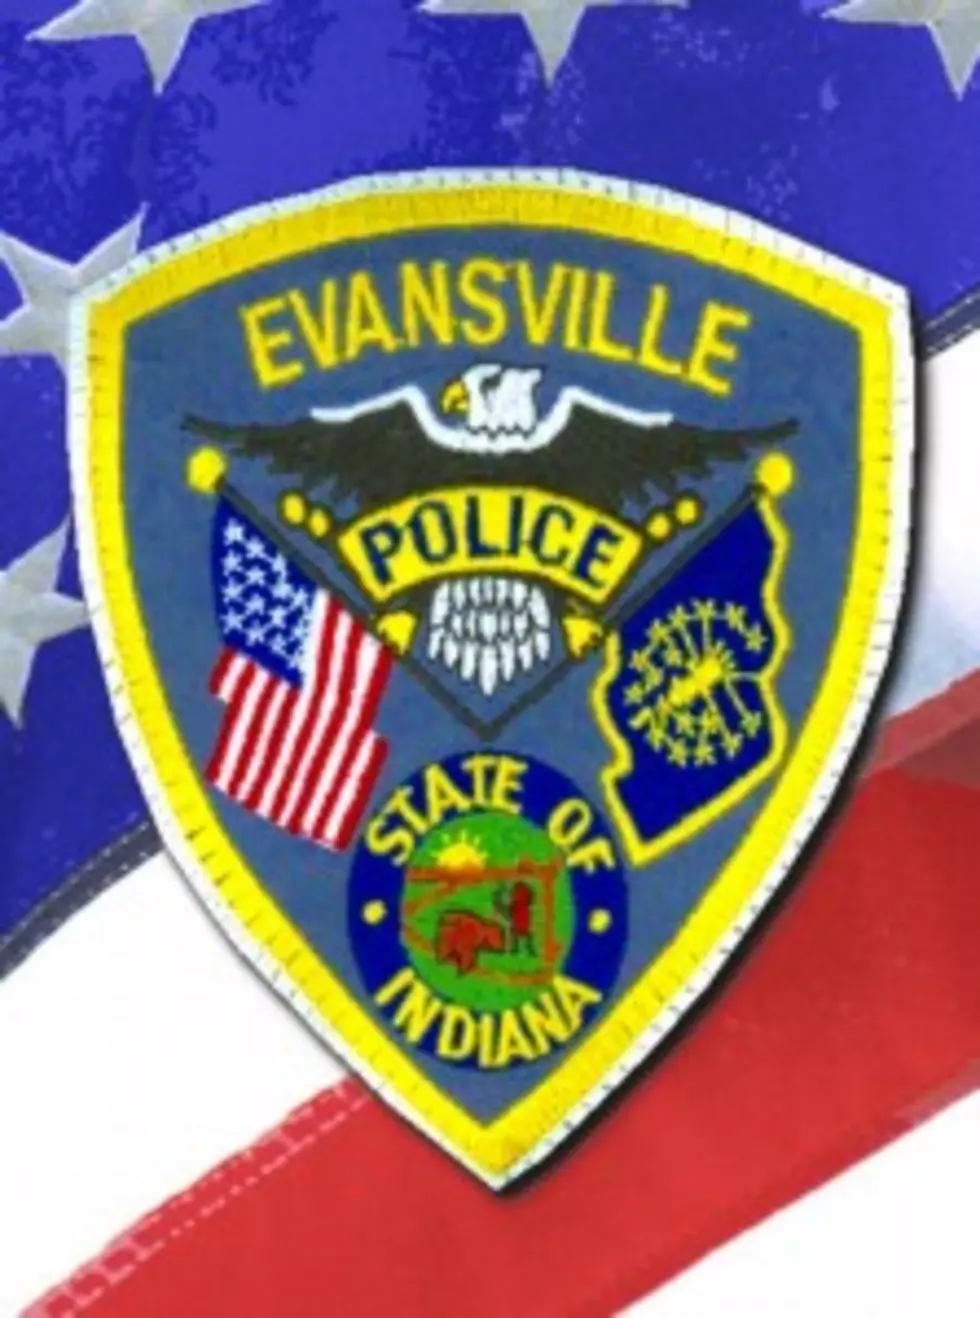 16 Things You May Deal With After Becoming an Evansville Police Officer